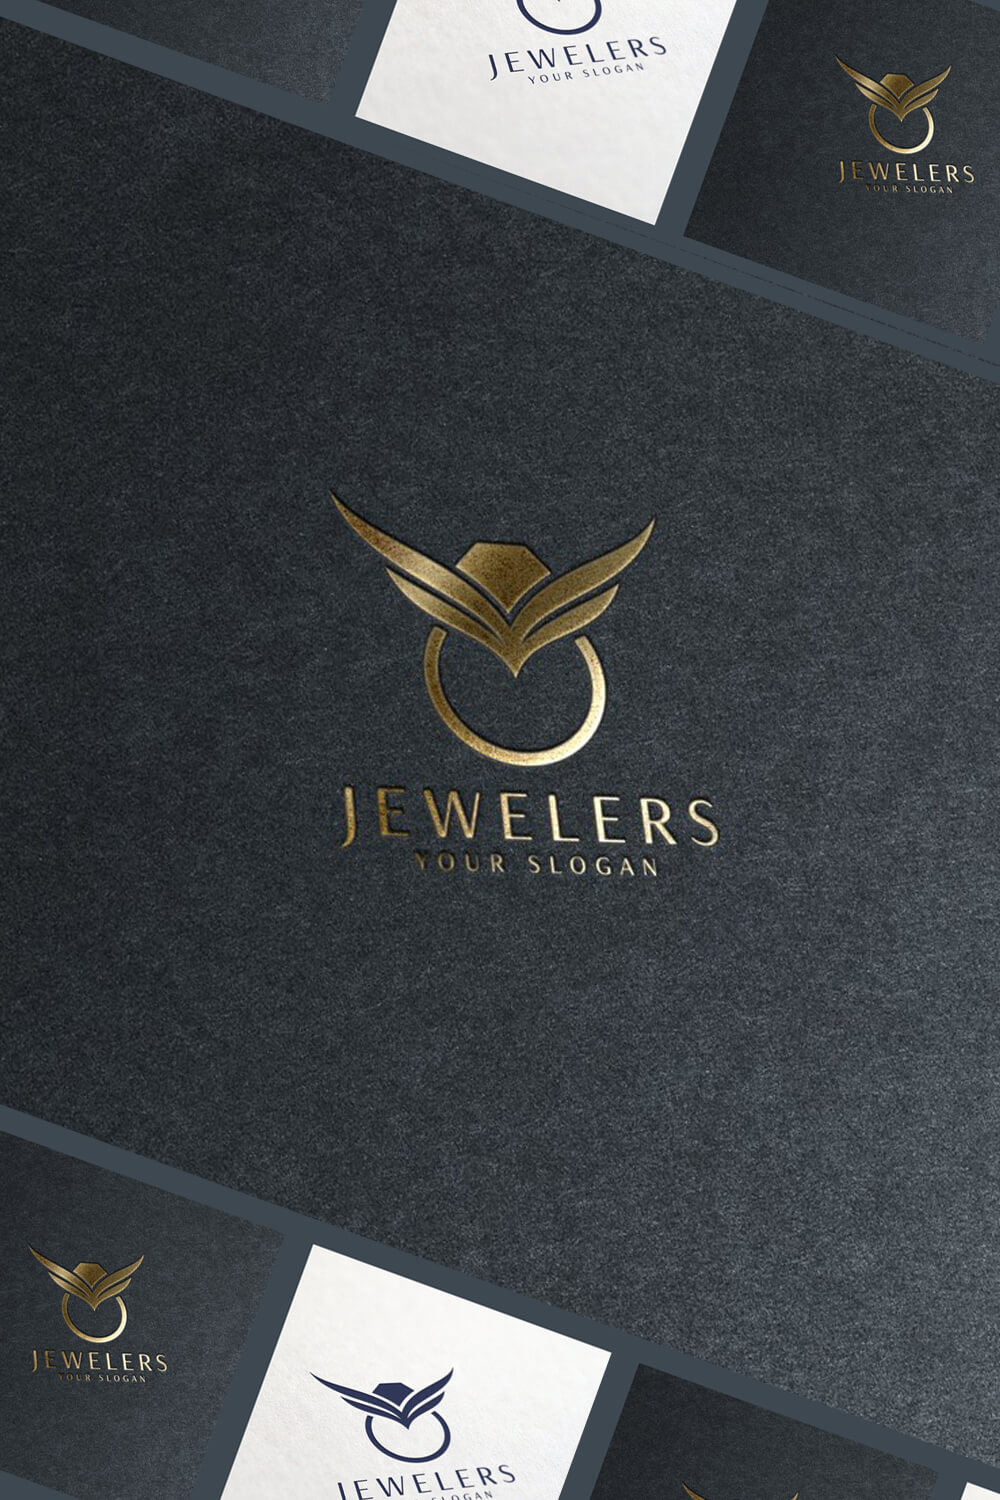 Large gold jewelry rings logo on a gray background placed diagonally.